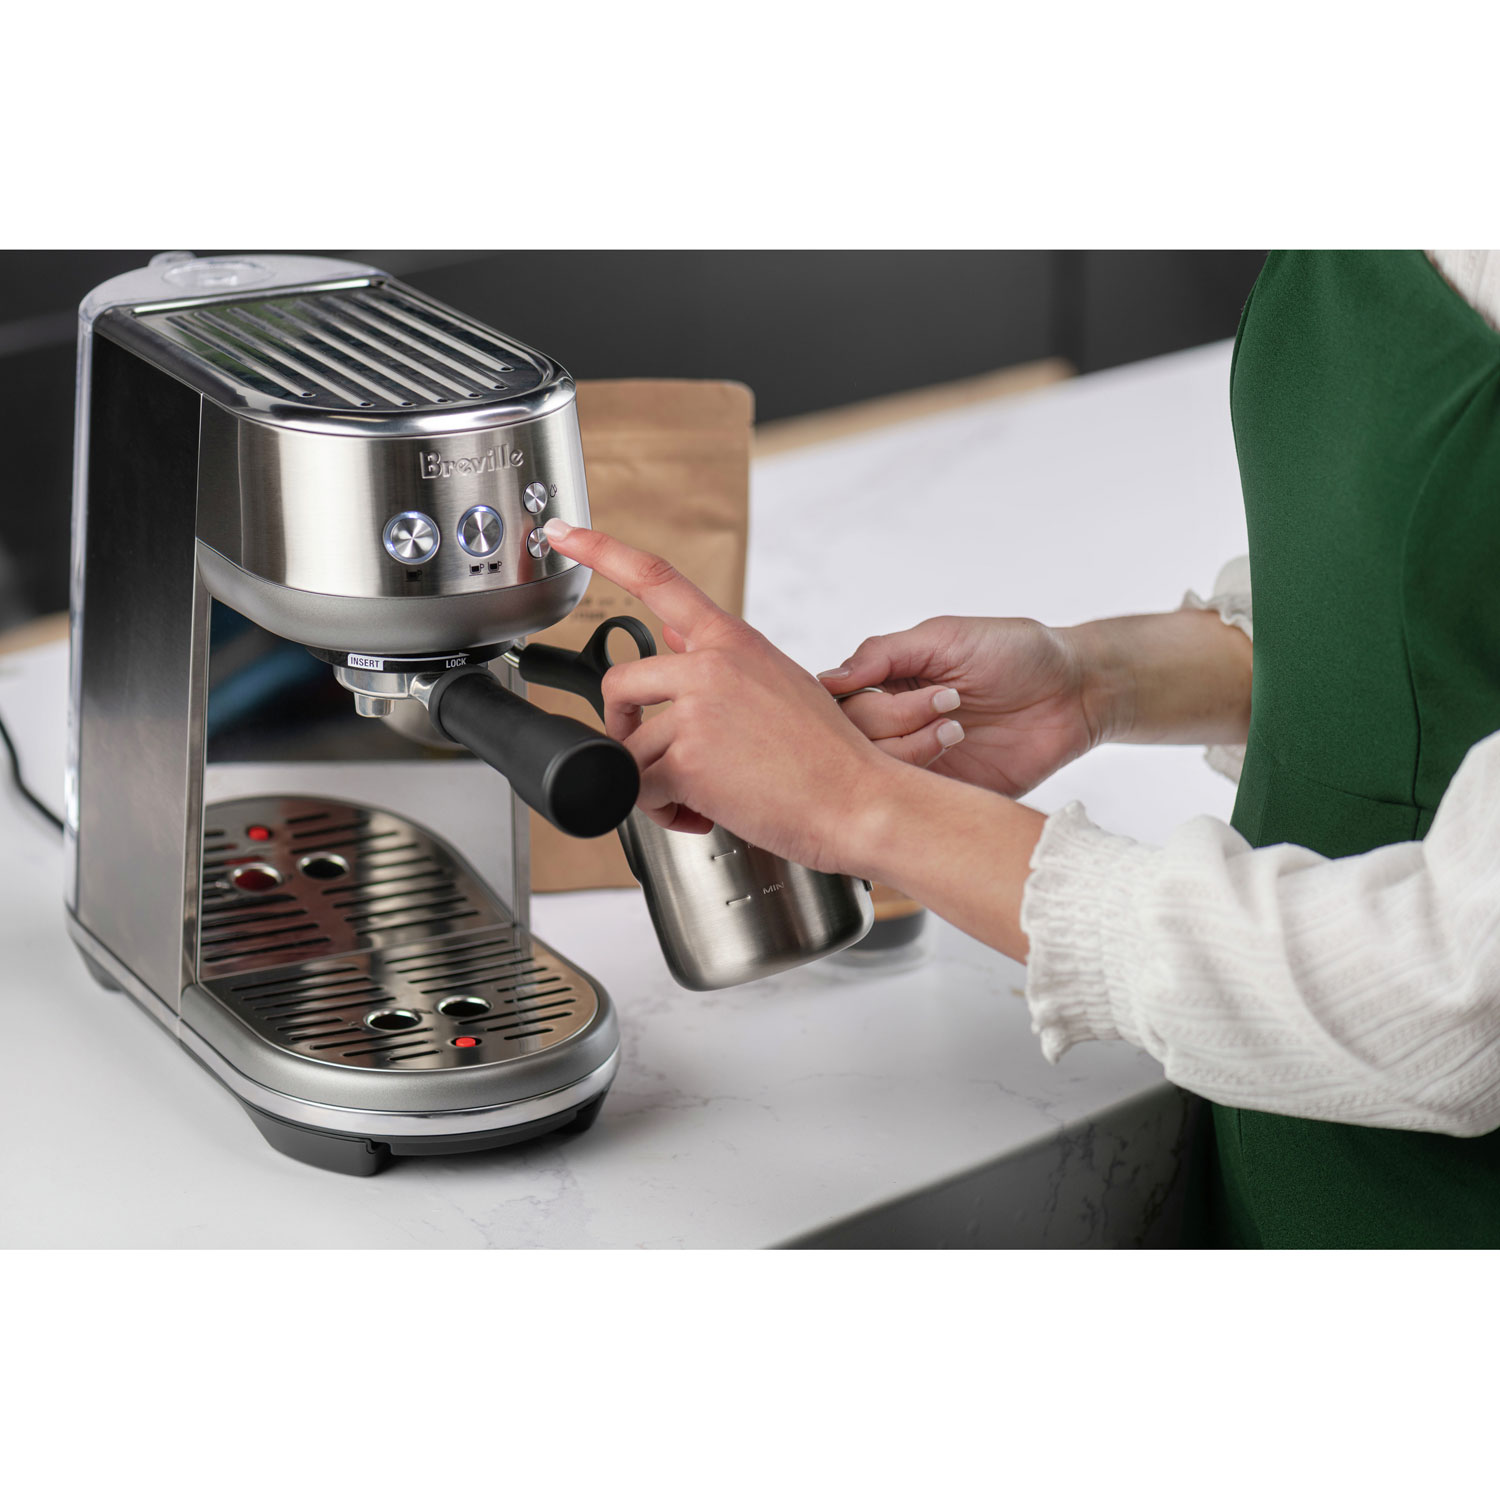  Breville Bambino Espresso Machine,47 Fluid Ounces, Stainless  Steel: Home & Kitchen